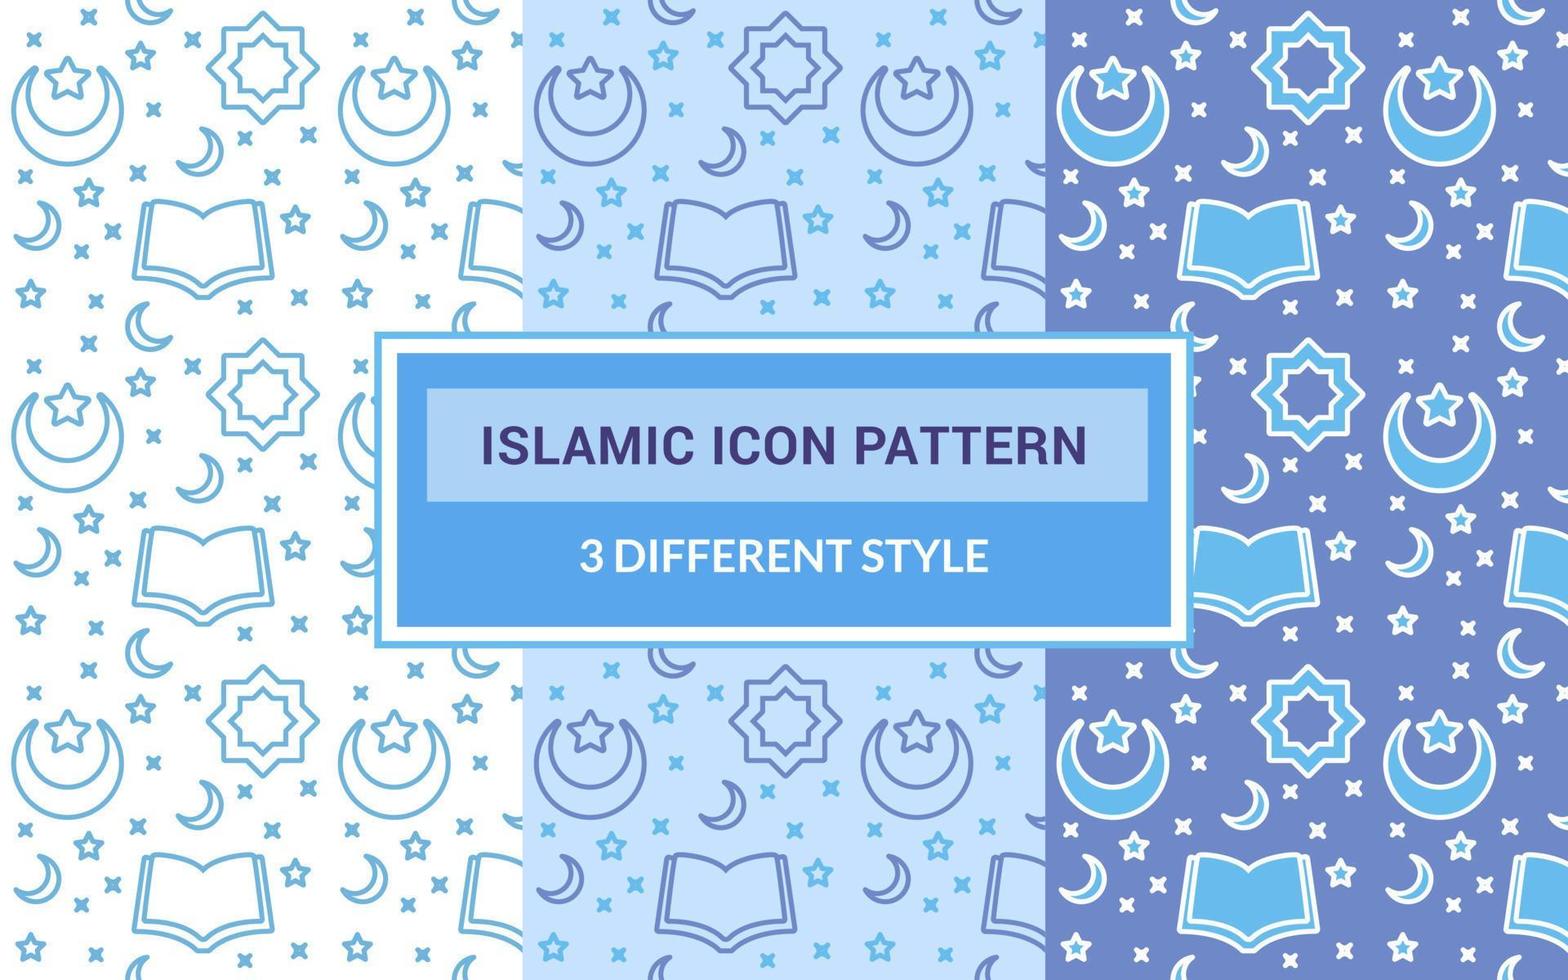 Islamic icon pattern quran open book crescent moon star arabian ornament with bundling version three different blue theme style flat design. vector